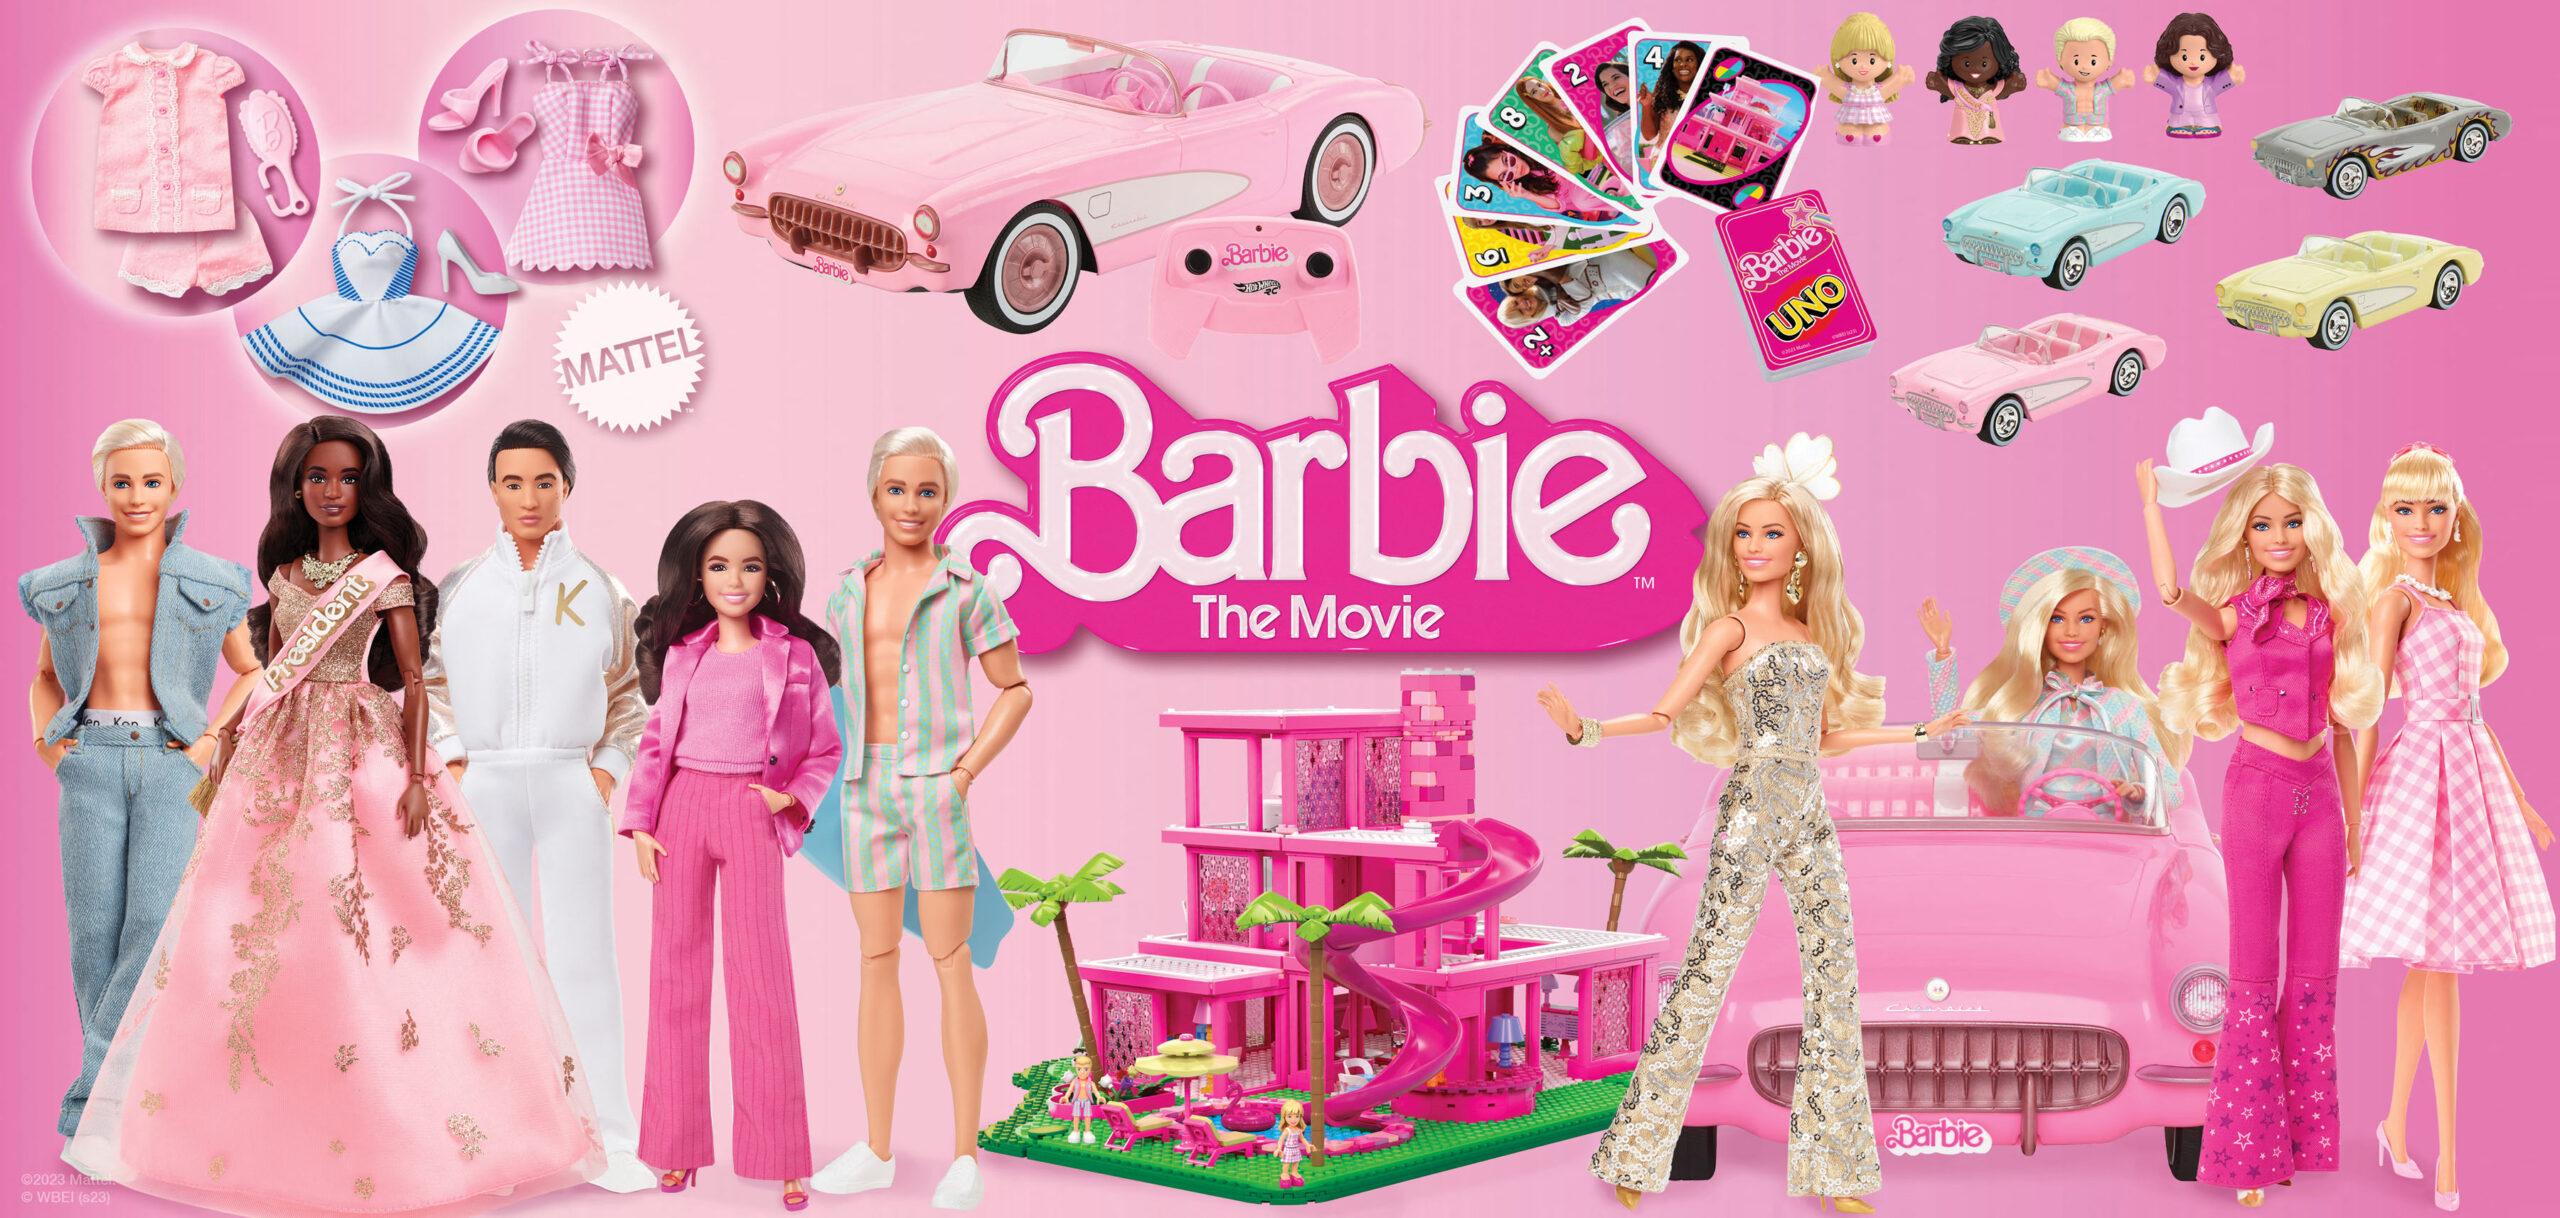 Ryan Gosling Reacts to Barbie Fans Saying He's Too Grown Up for Ken Role